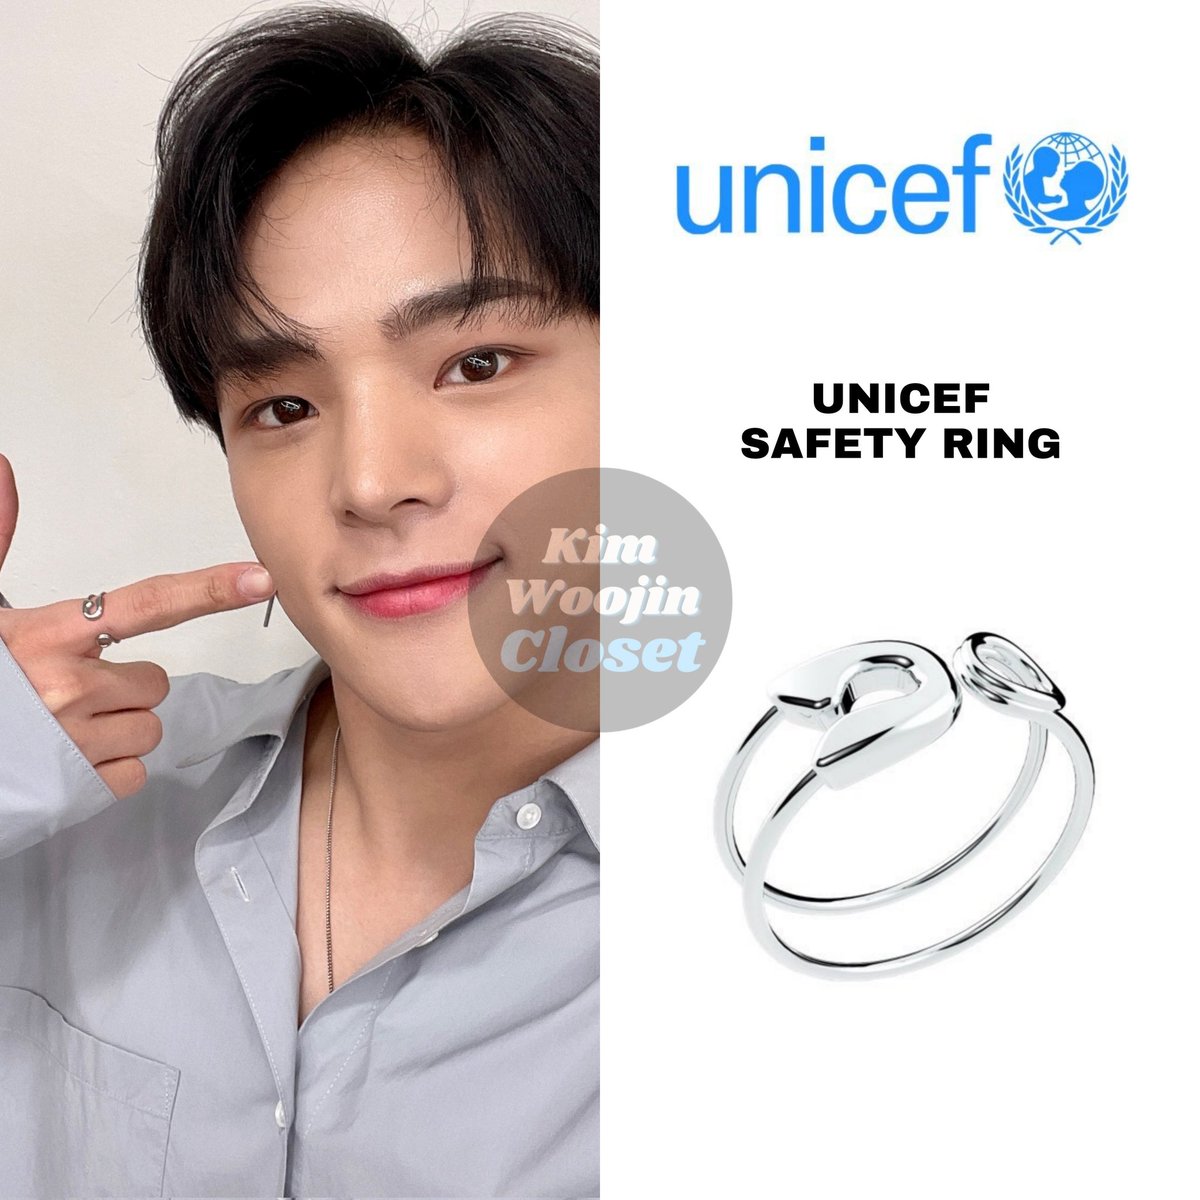 Modstand Det forum KIM WOOJIN CLOSET on Twitter: "The UNICEF Safety Ring is given to  individuals who are regular sponsors of the For Every Child campaign. The  ring shaped as a safety pin is “a